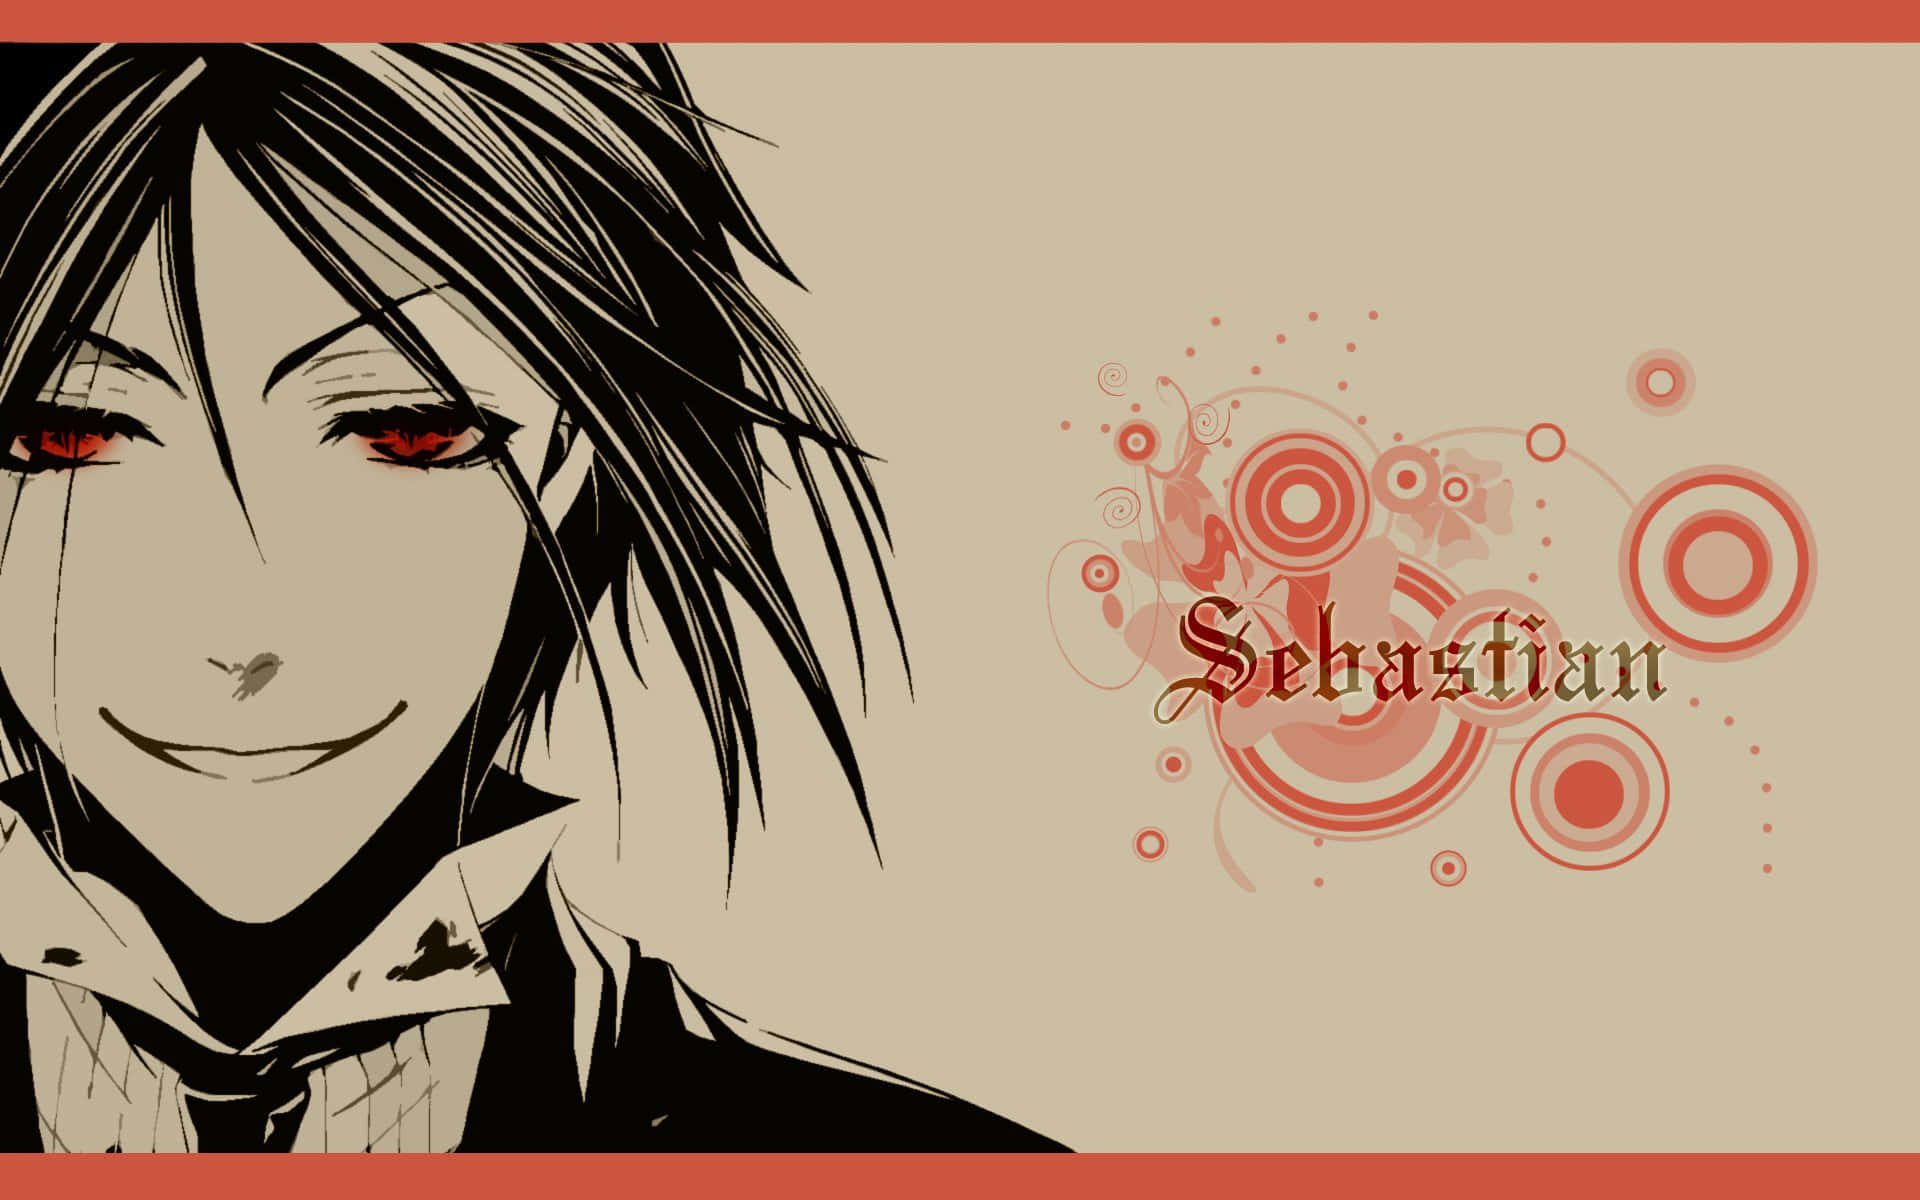 Ciel Phantomhive and Sebastian Michaelis, the perfect pair from the hit anime Black Butler.